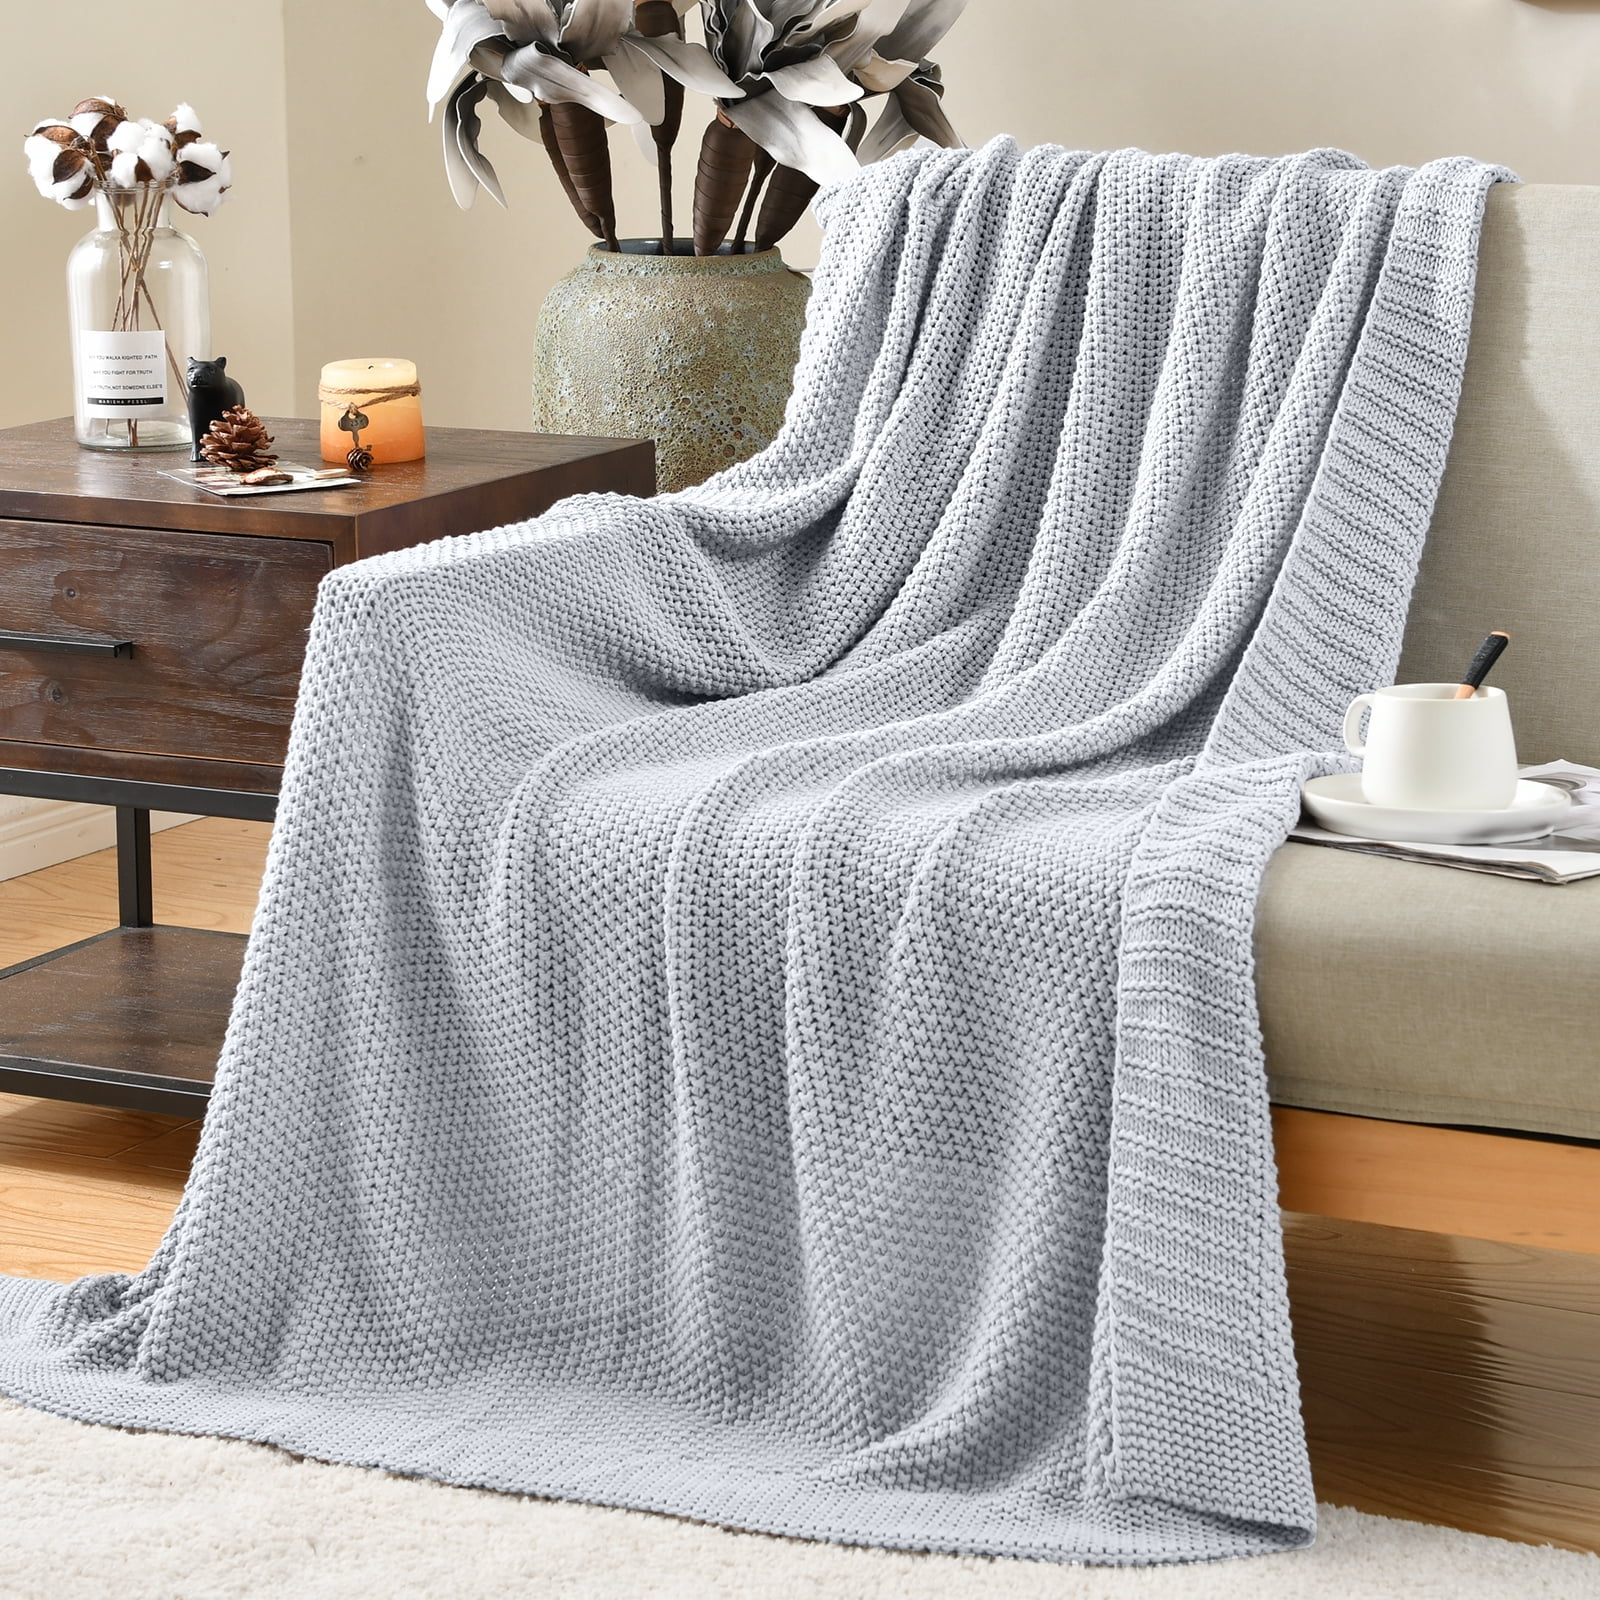 100% Cotton Honeycomb 2 Tone Sofa Settee Bed Throw 7 Colors & 6 Sizes Waffle 